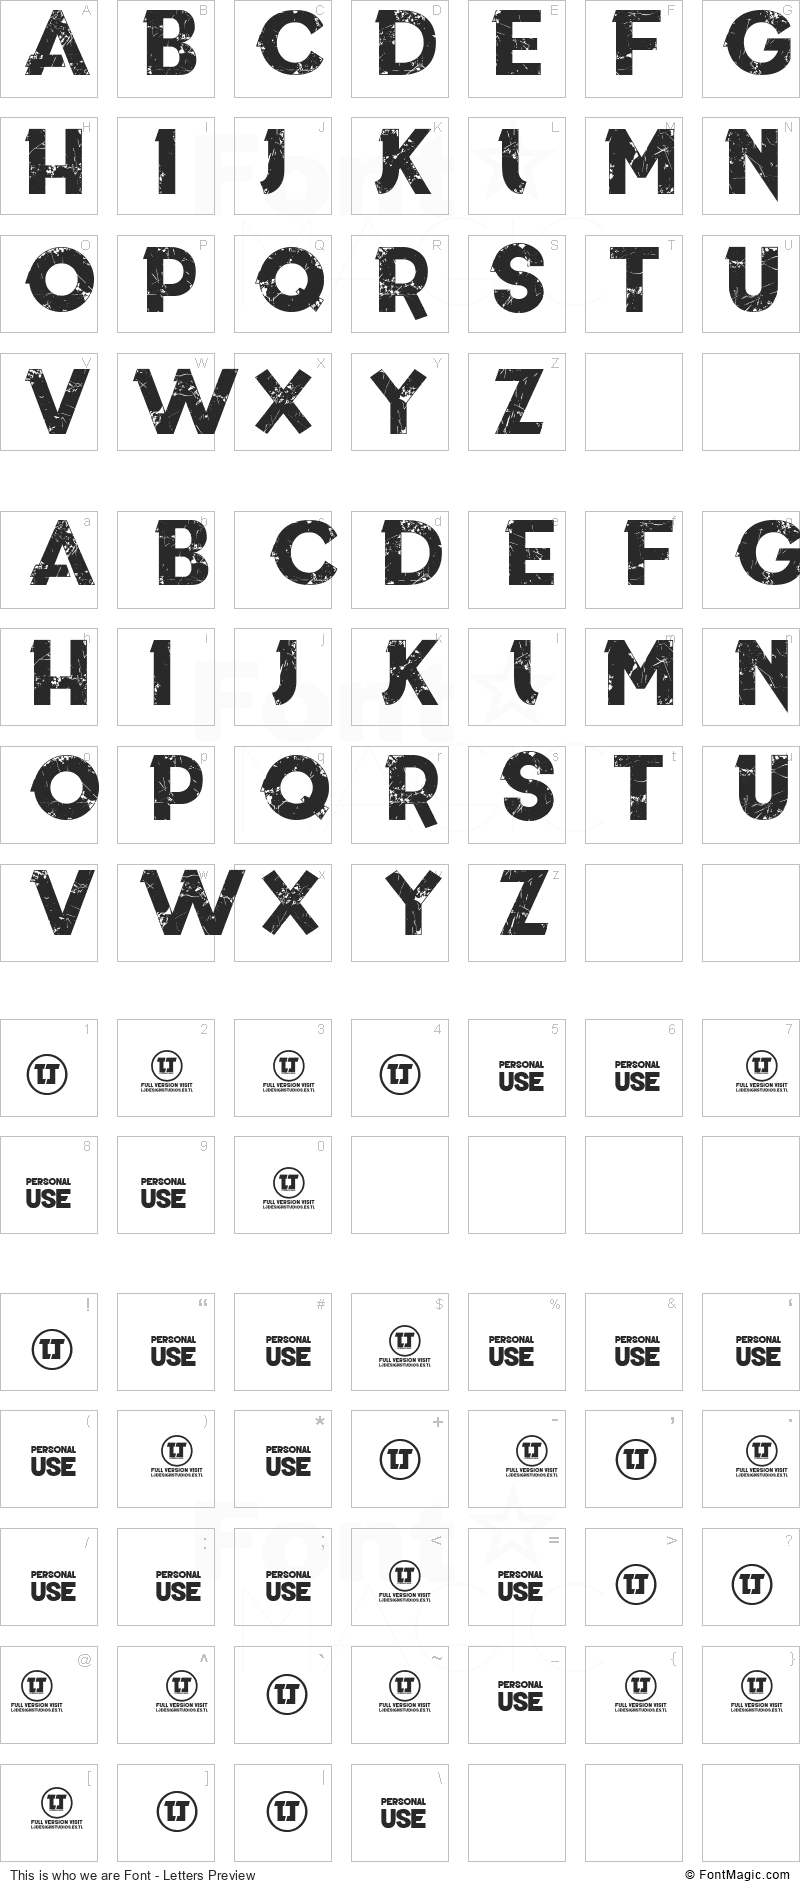 This is who we are Font - All Latters Preview Chart